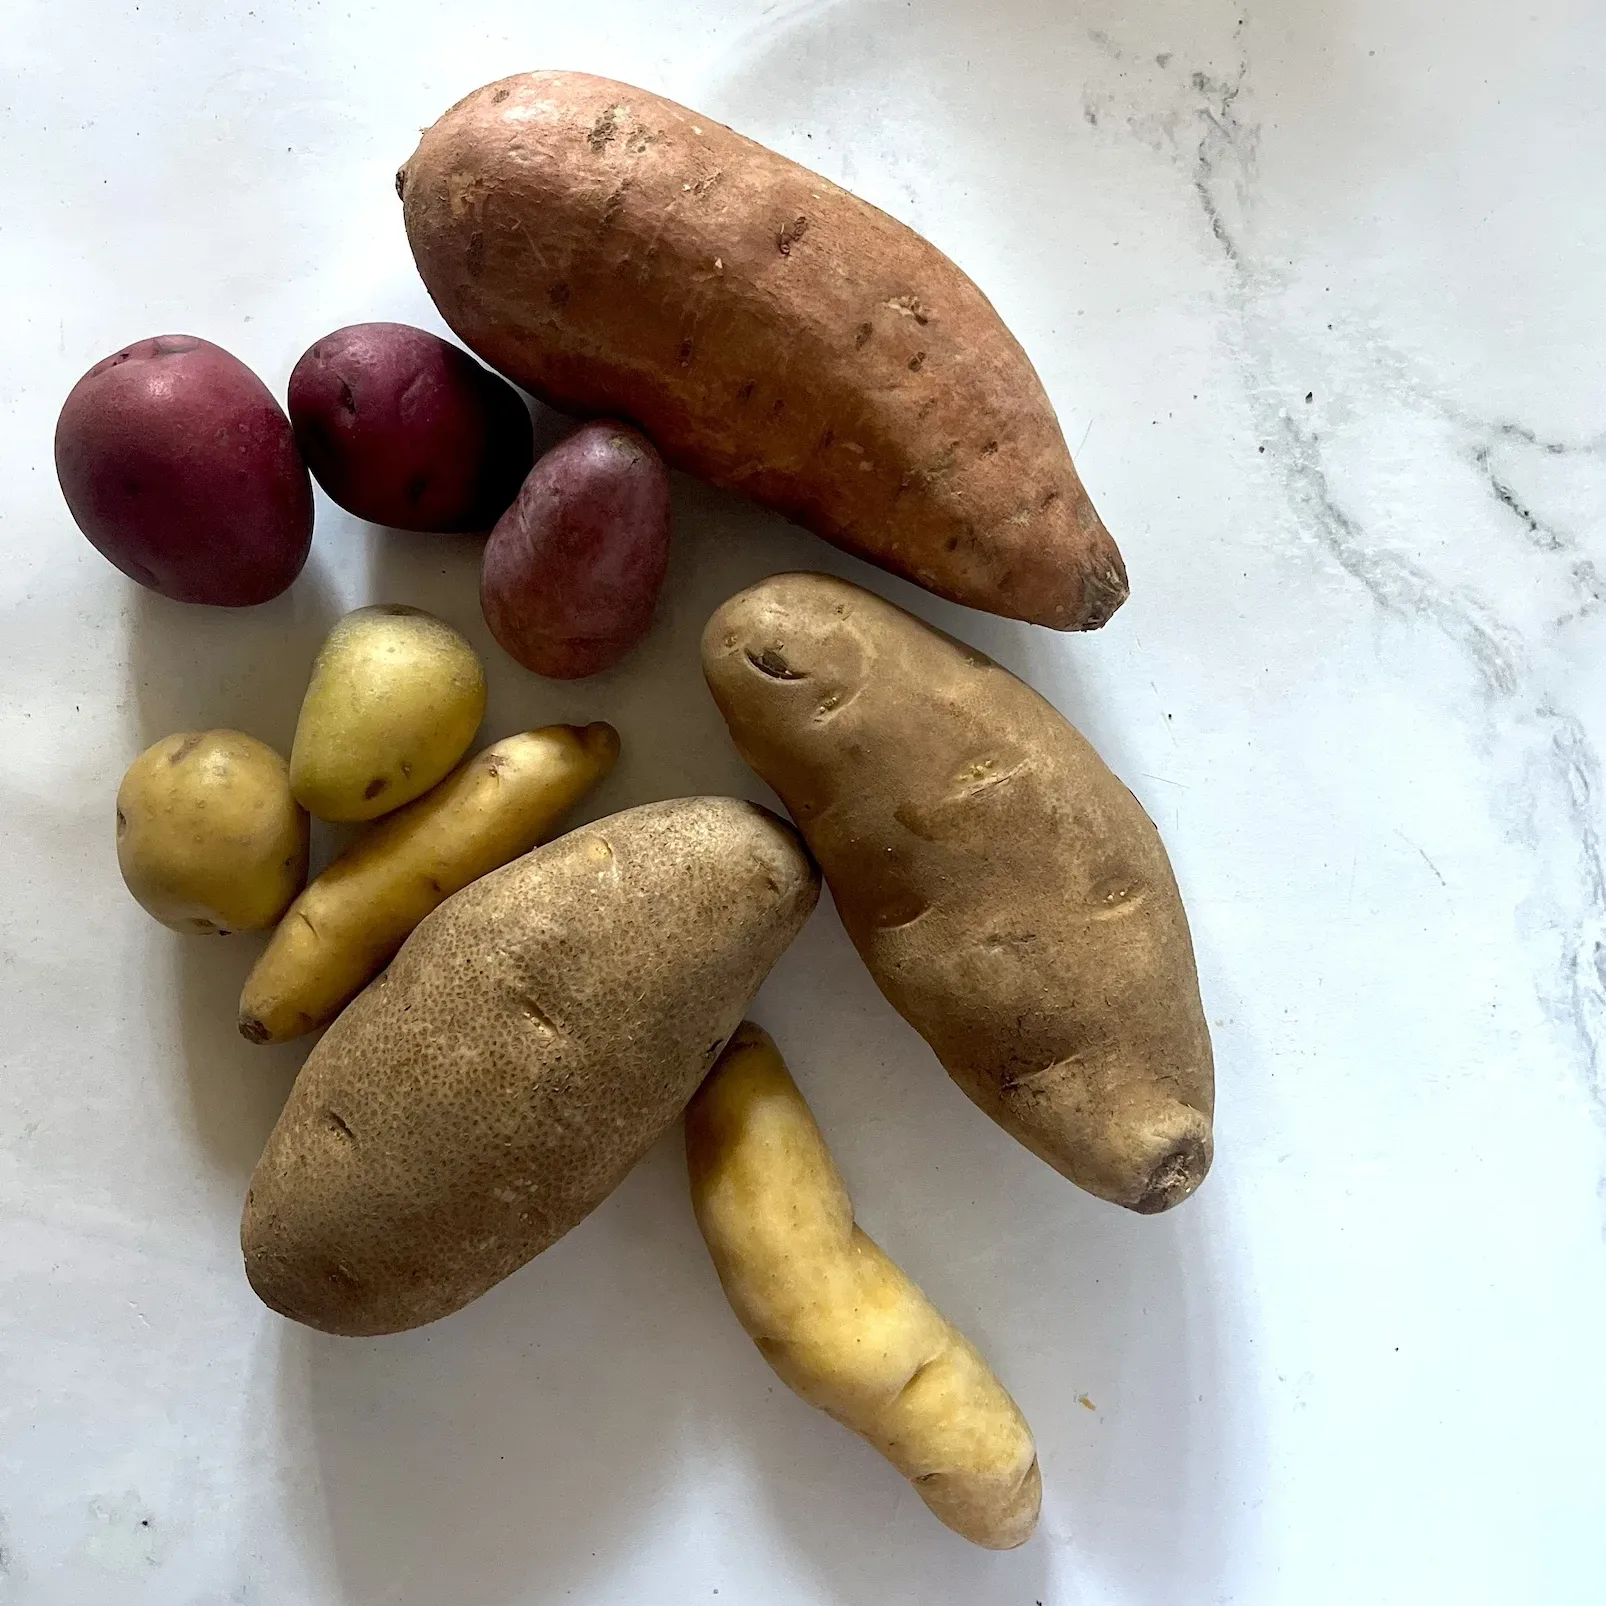 a variety of potatoes on white countertop